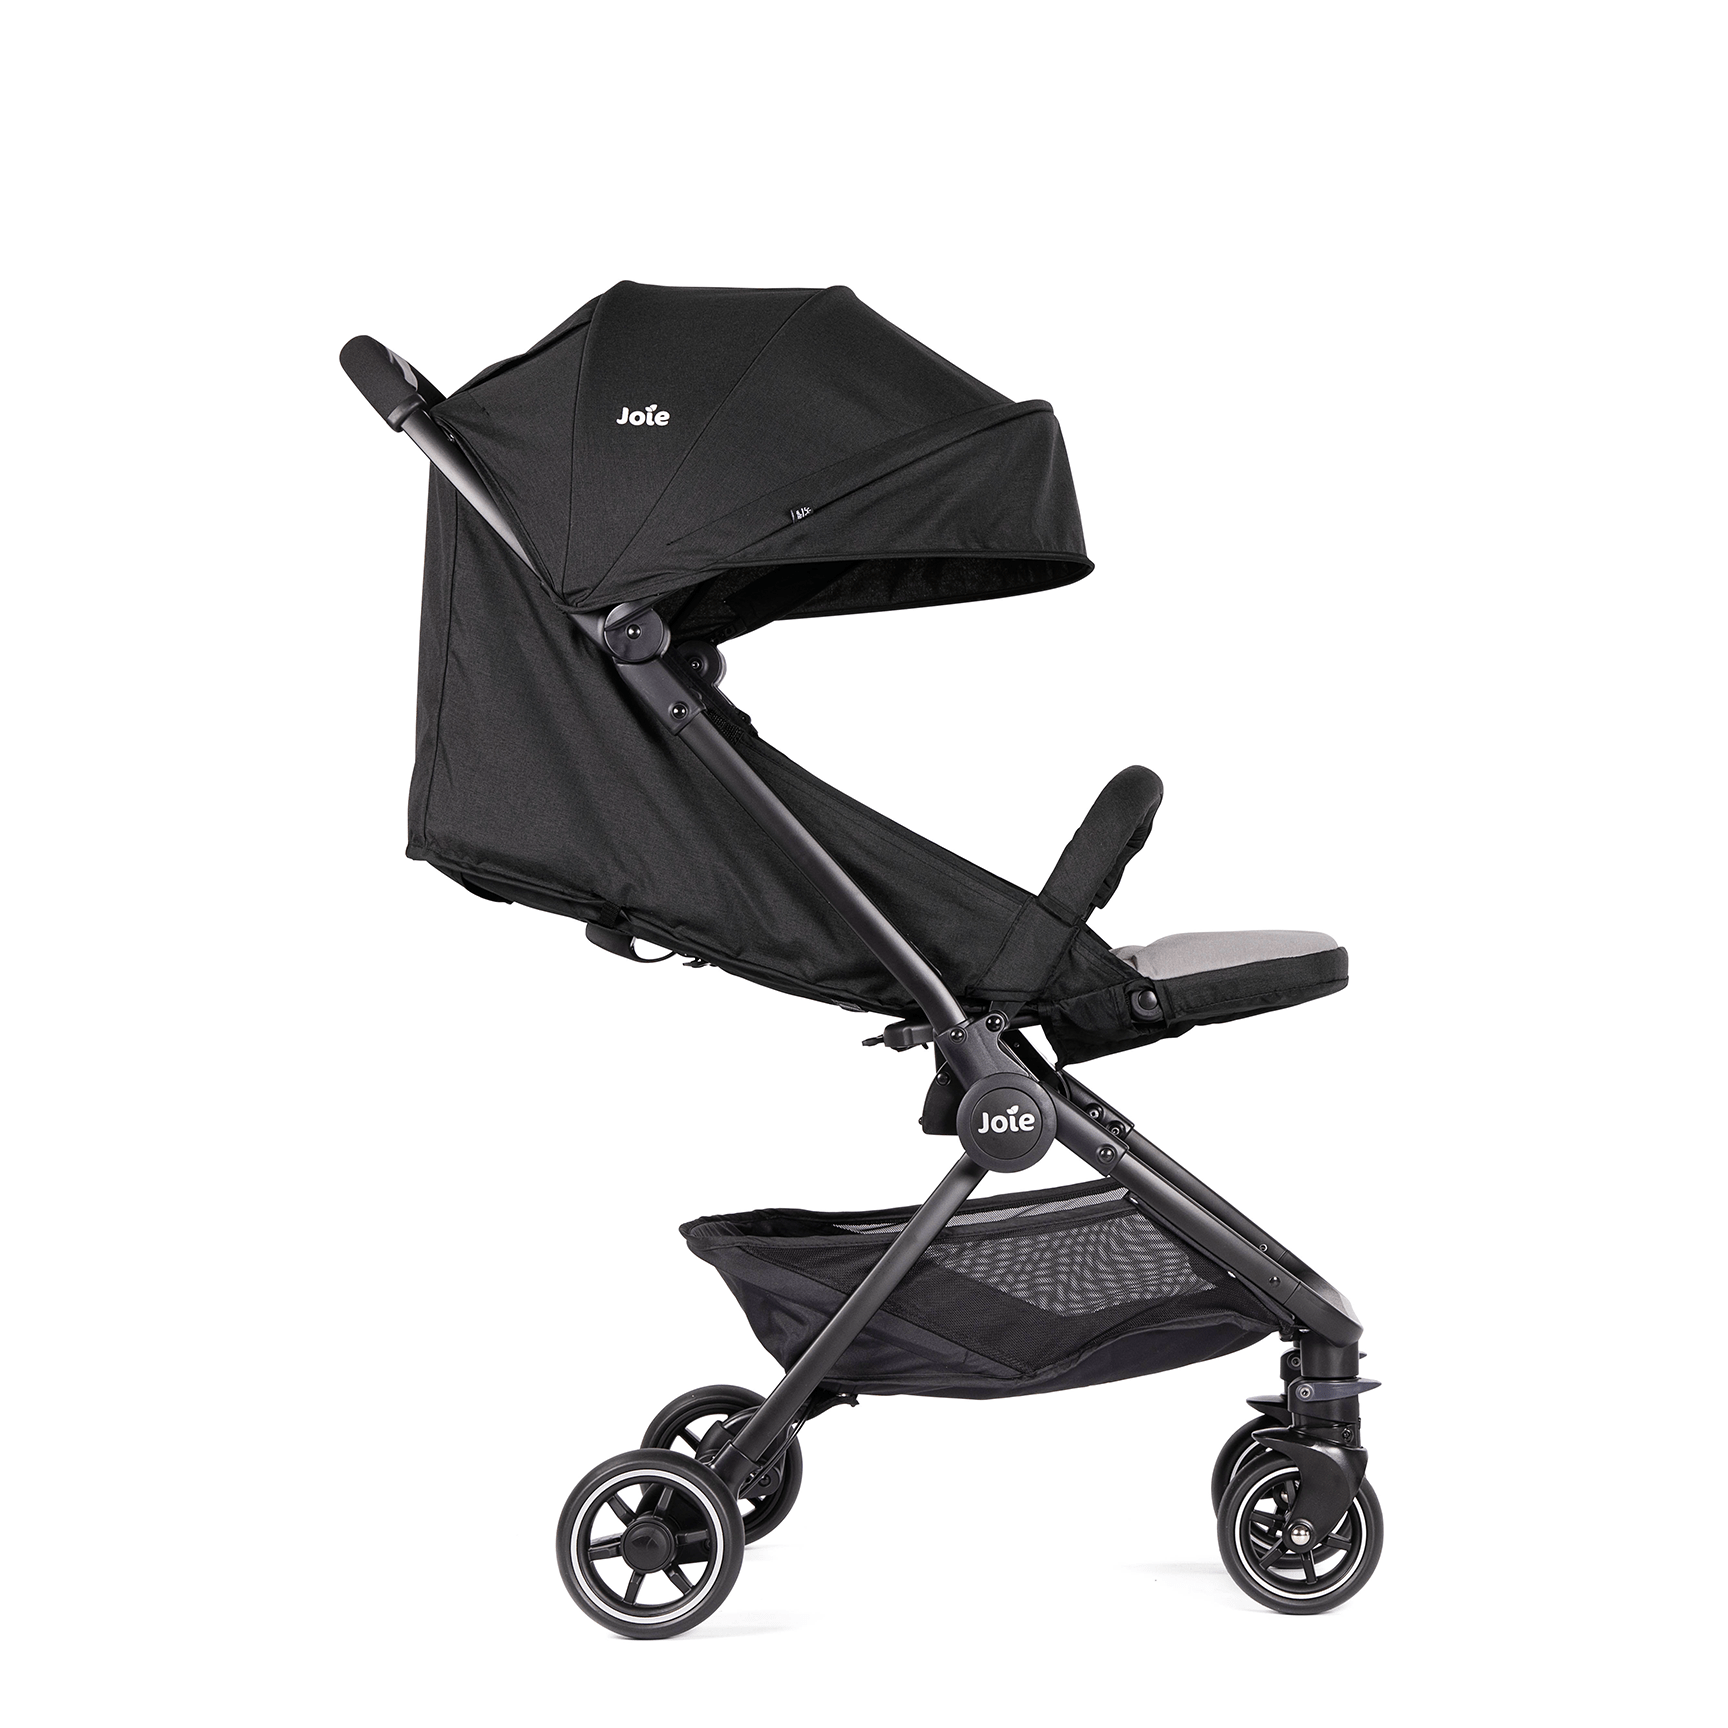 Joie Pact Stroller in Ember Pushchairs & Buggies S1601DAEMB000 5056080608129